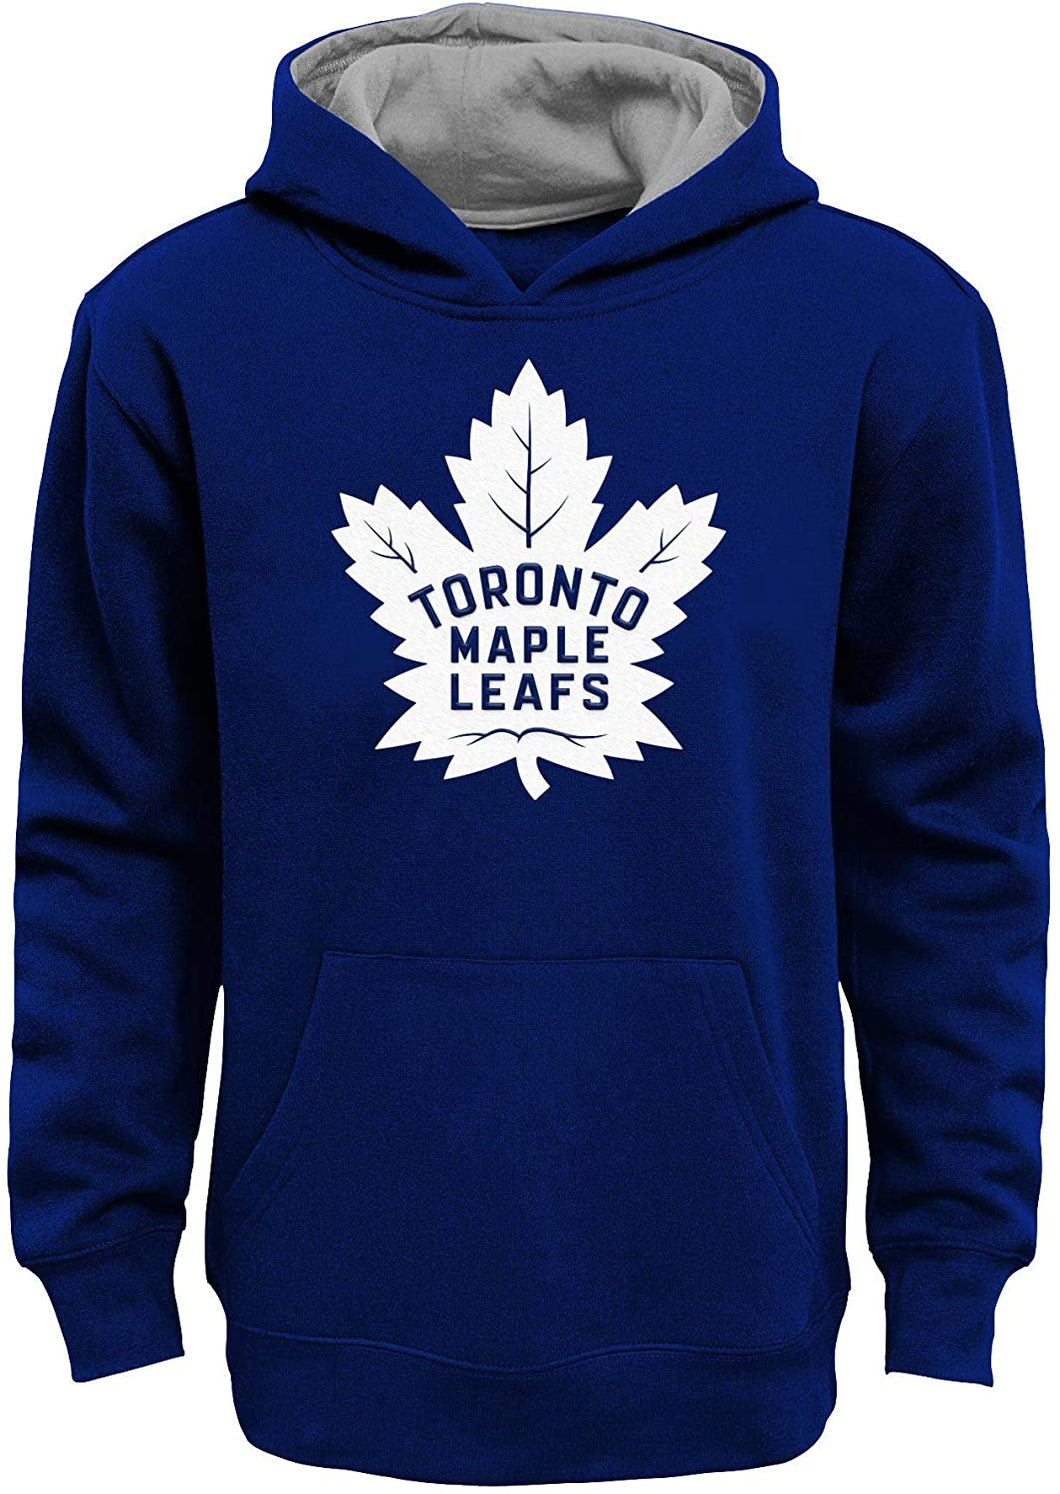 Toronto Maple Leafs NHL Child & Youth Prime Basic Pullover Fleece Hoodie